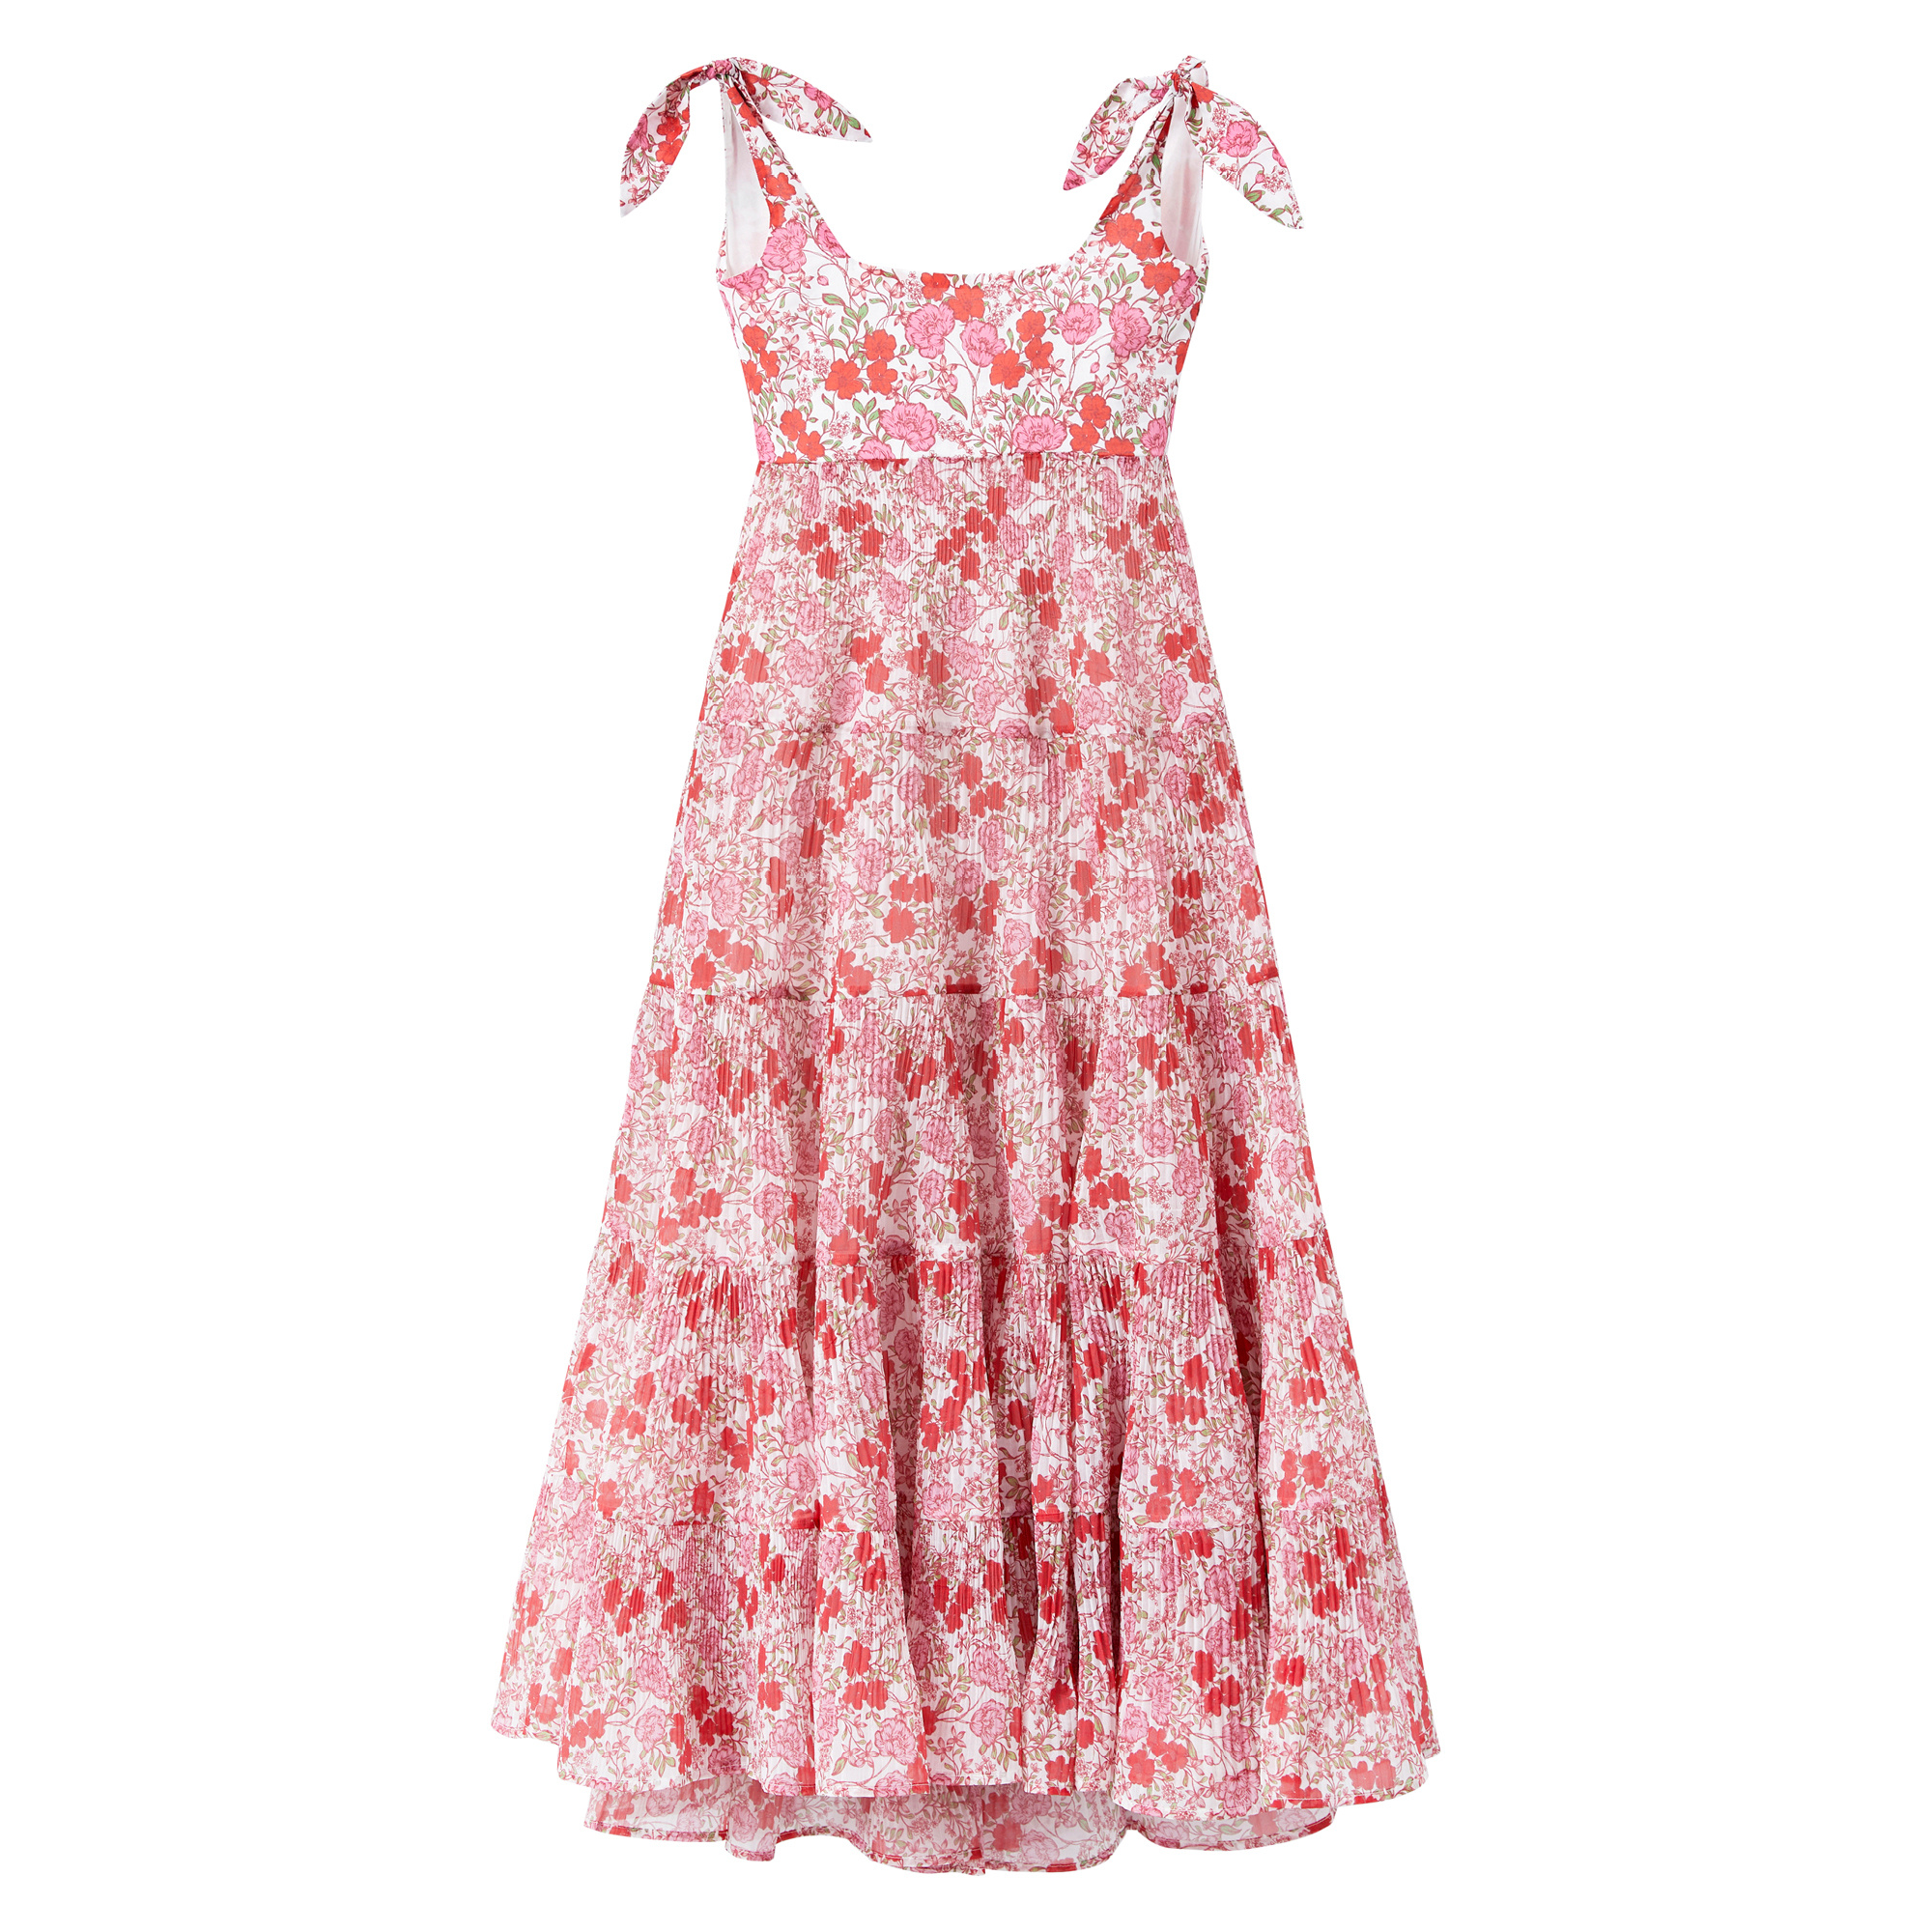 Marlo Holly Maxi Floral Dress - Calakids